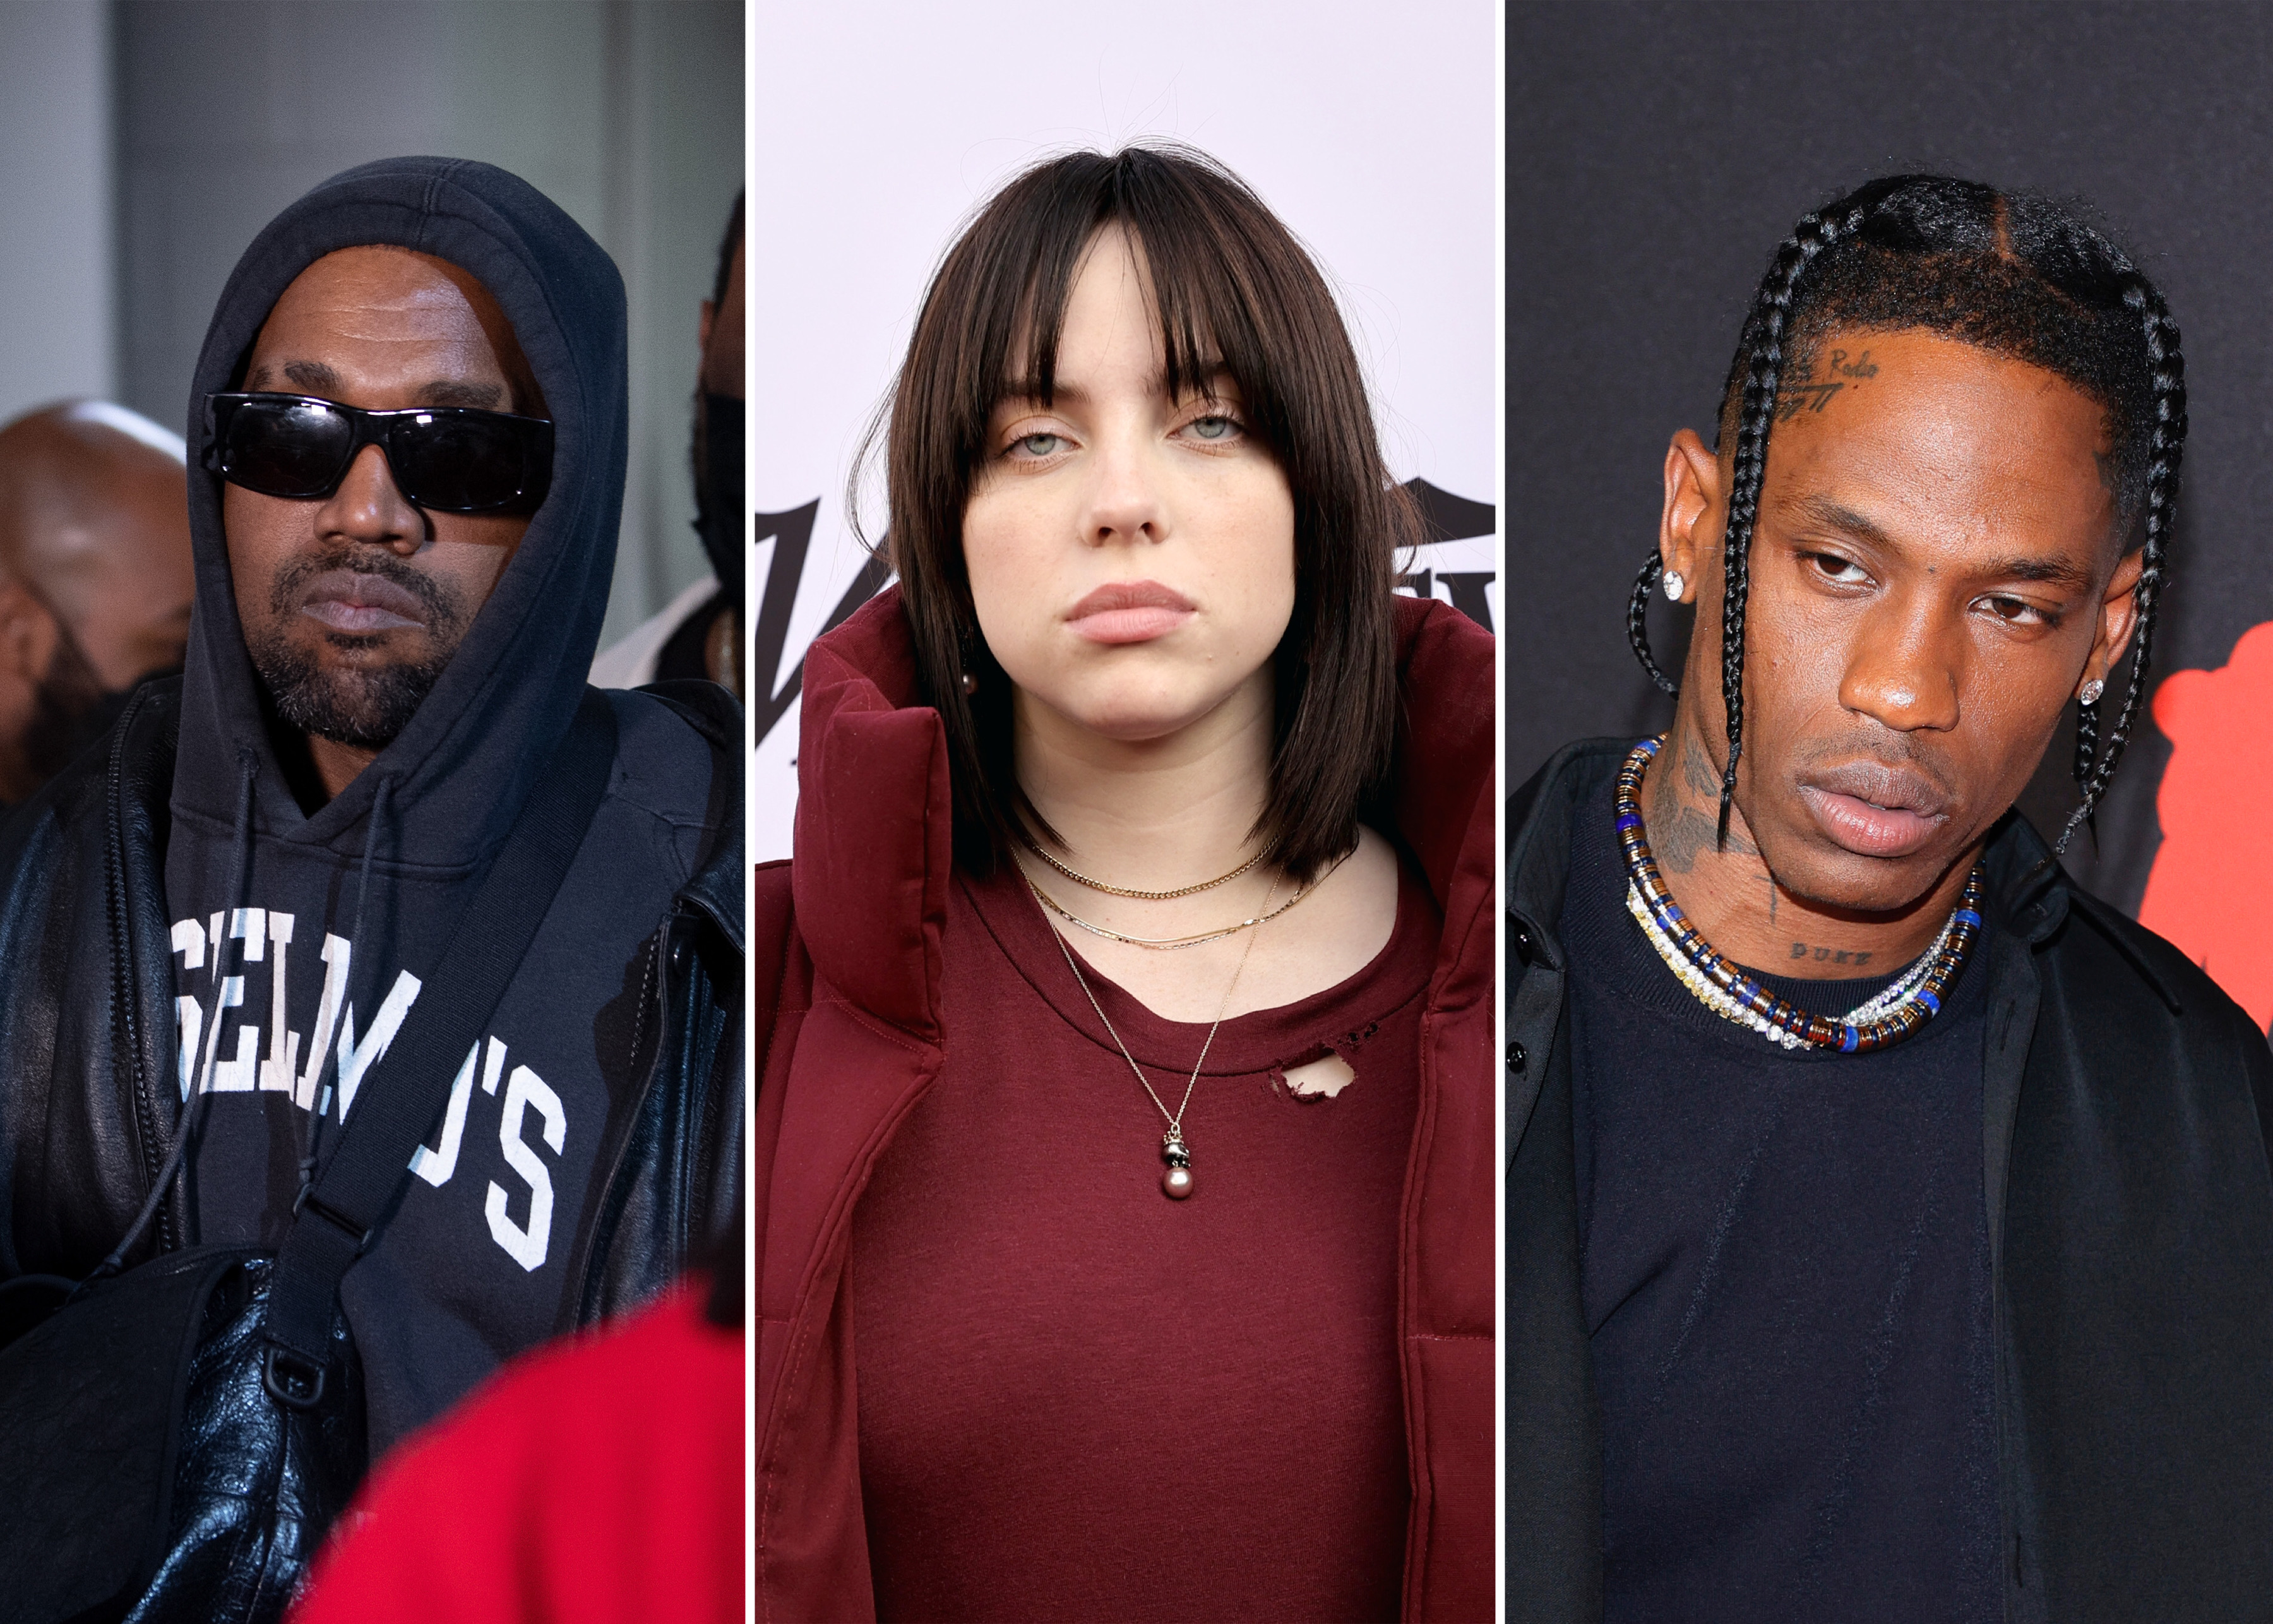 Kanye West says Billie Eilish needs to apologize for dissing Travis Scott before he can perform at Coachella in April.